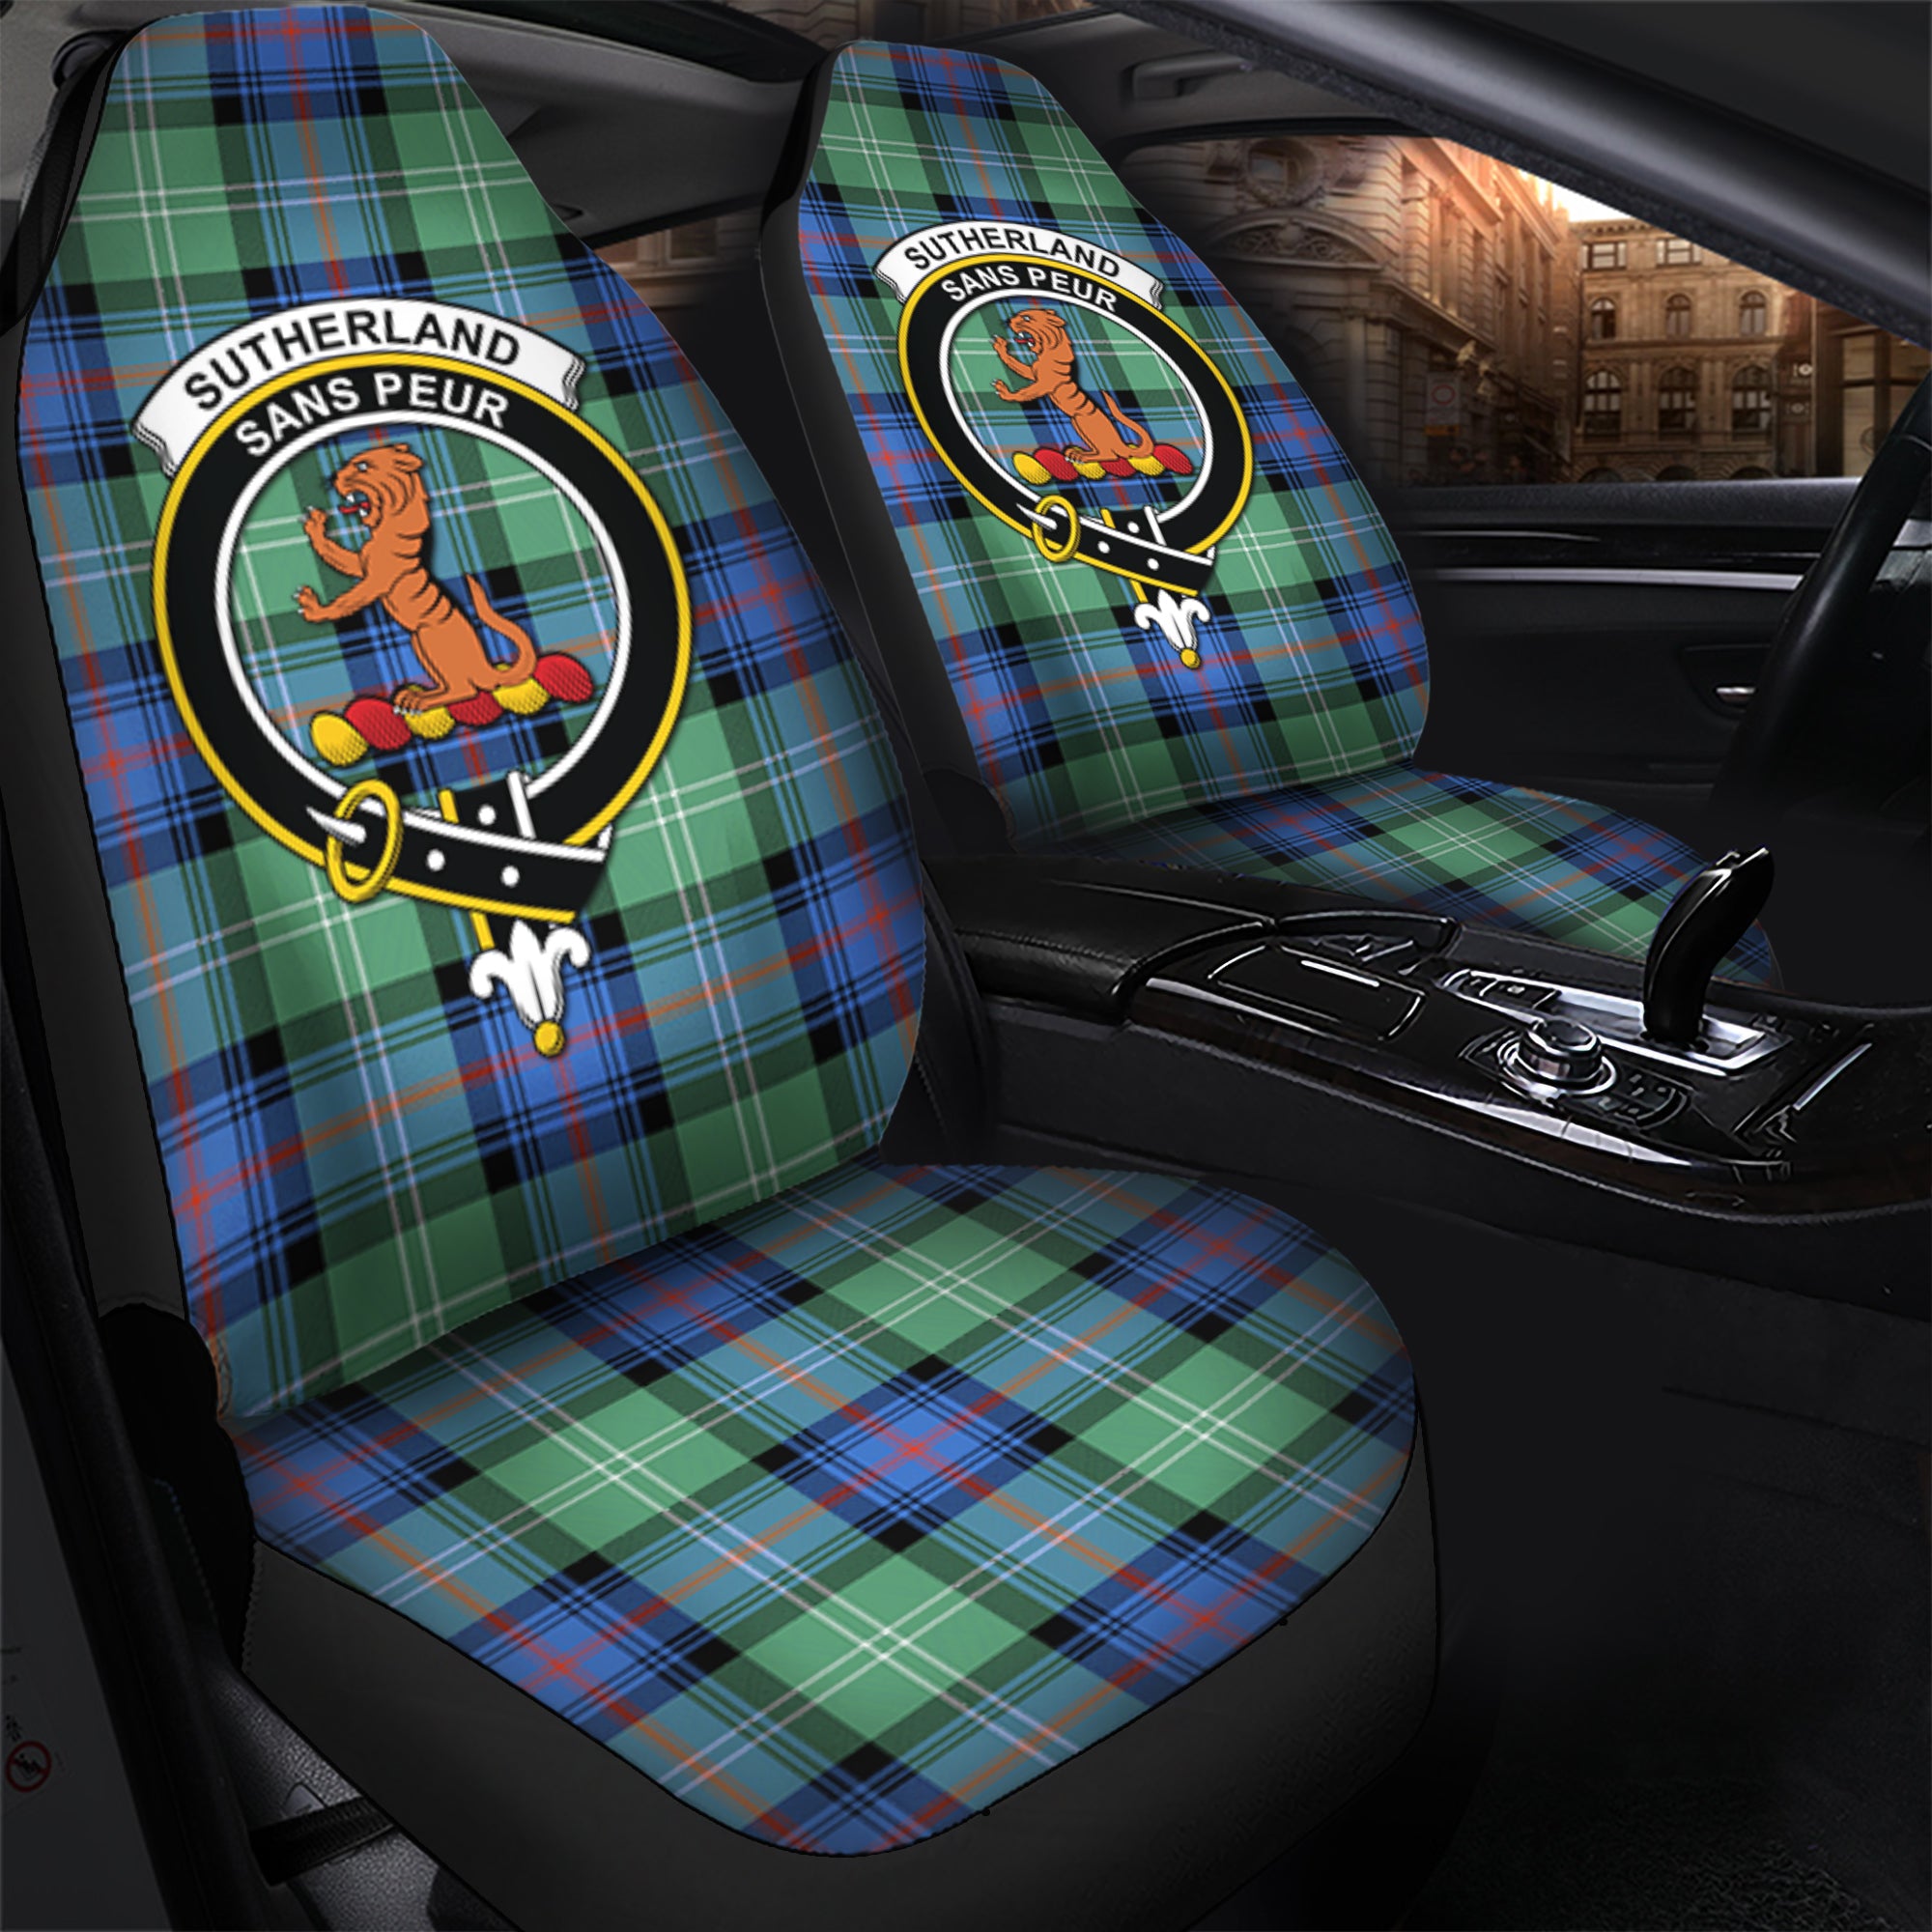 Sutherland Ancient Clan Tartan Car Seat Cover, Family Crest Tartan Seat Cover TS23